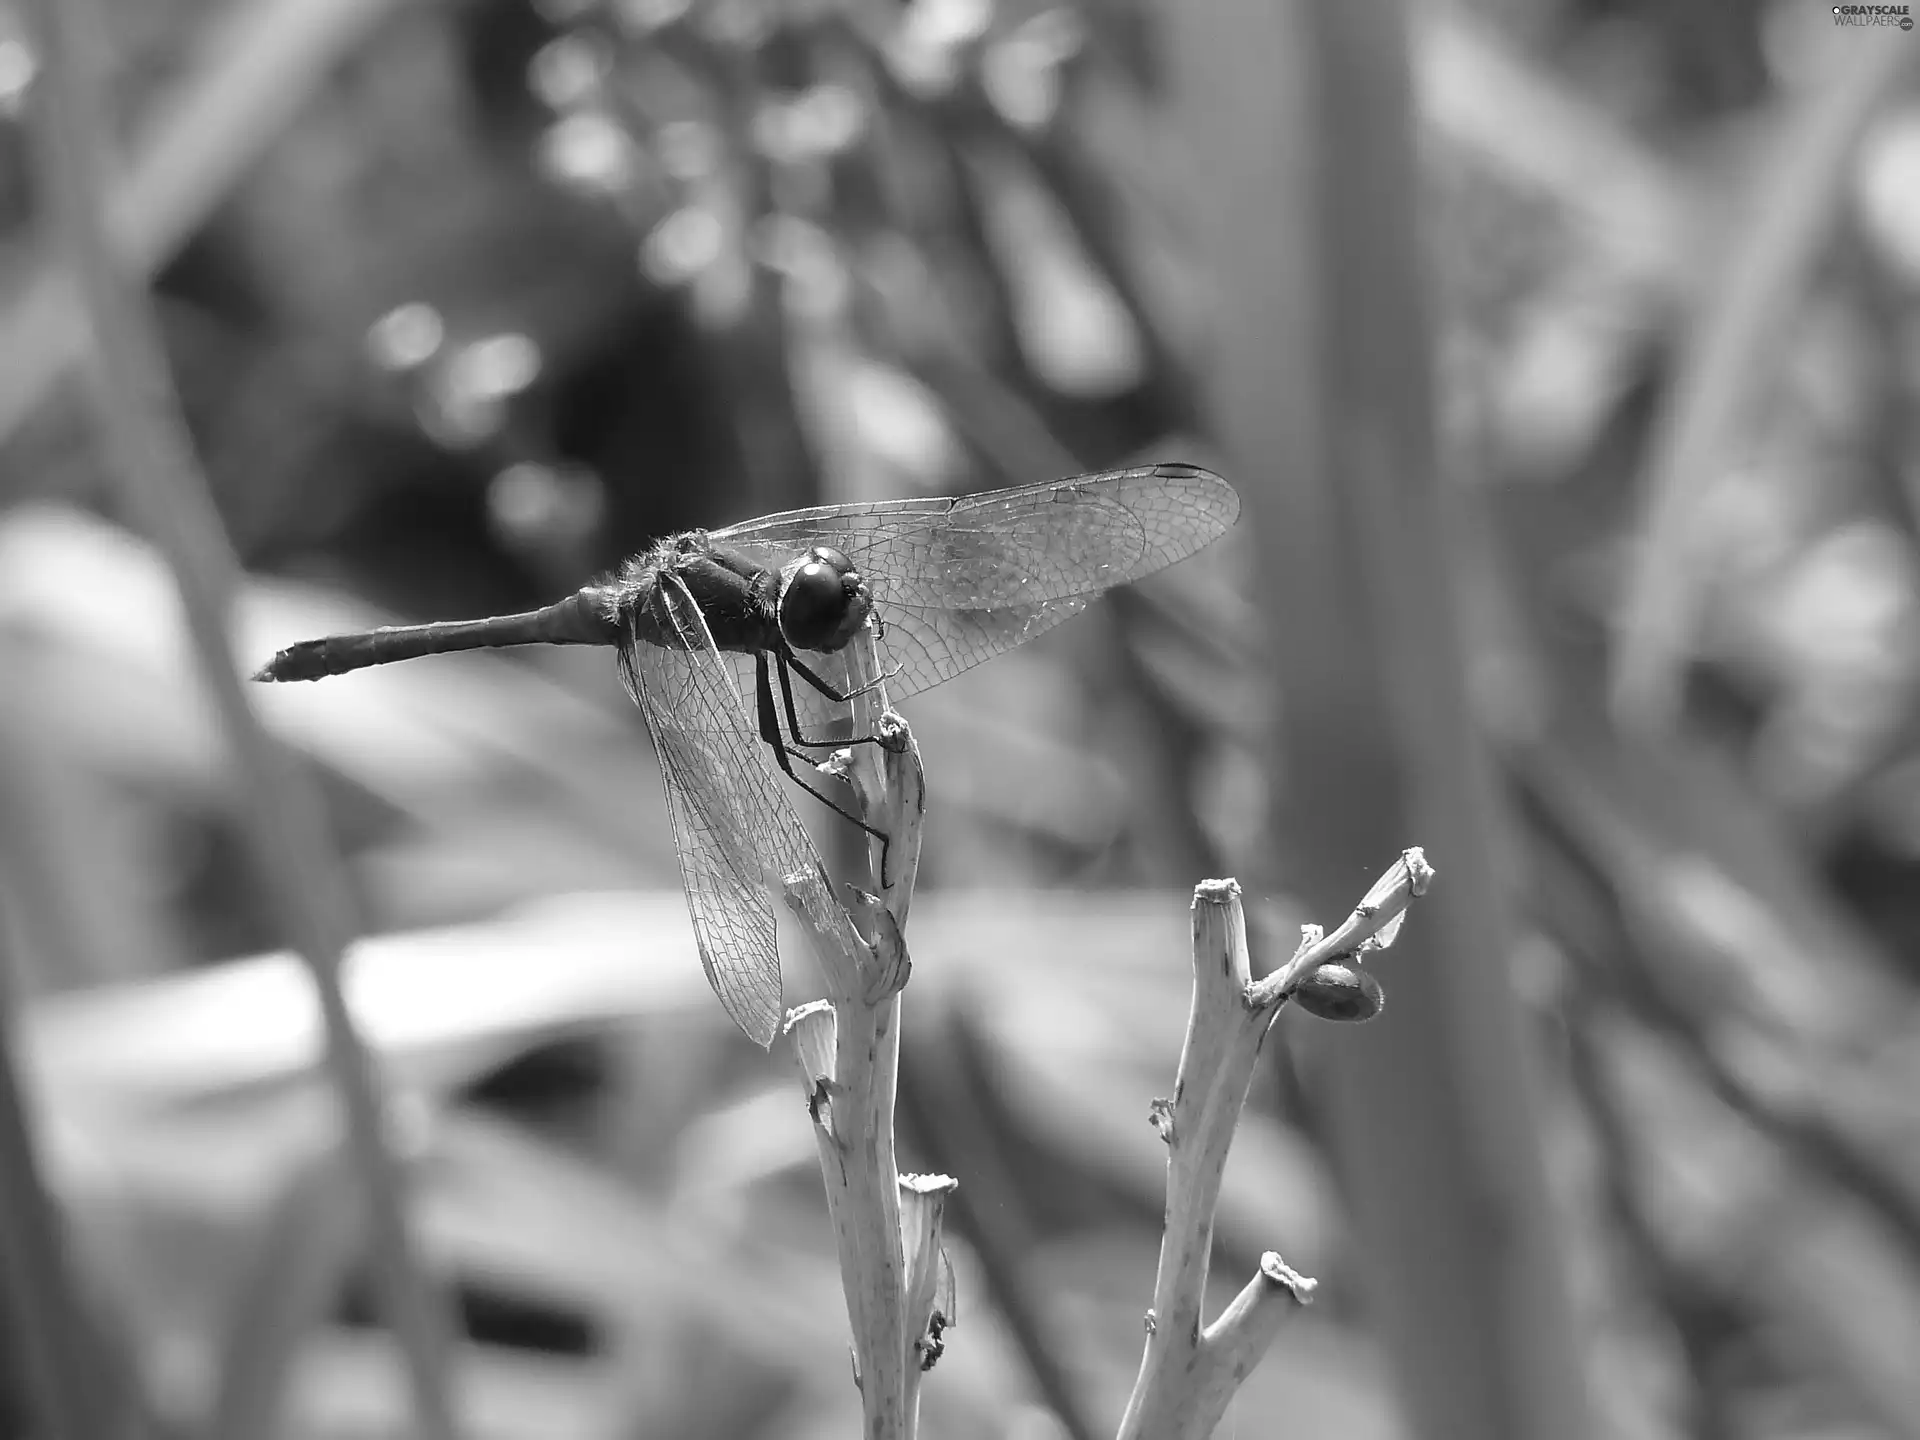 dragon-fly, Common Darter Dragonfly